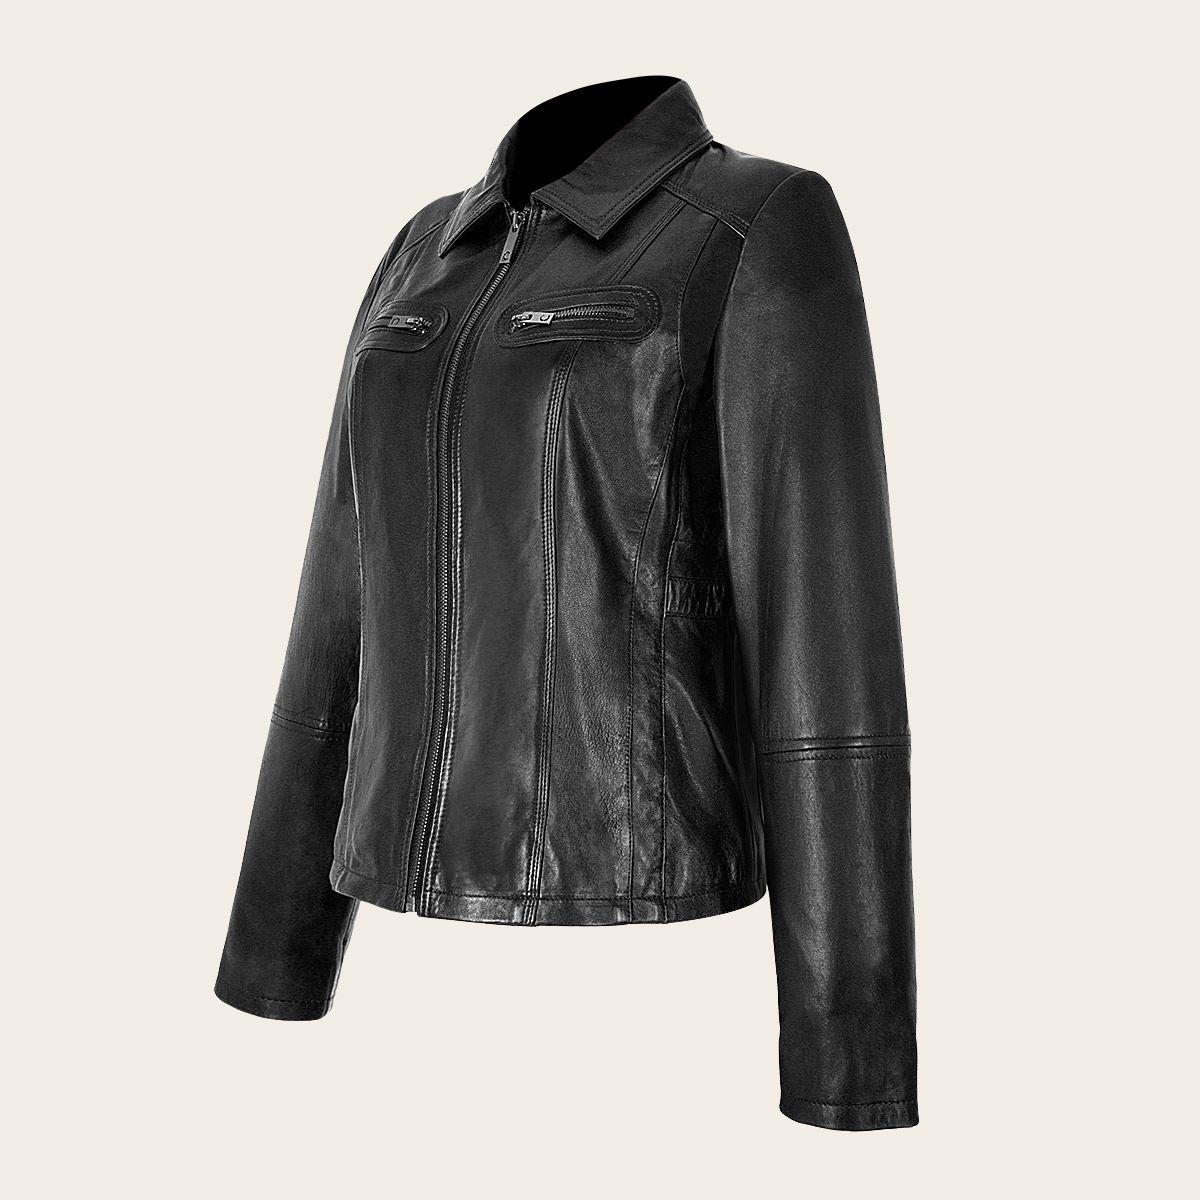 Womens black leather jacket, Sheepskin jacket for women. On the front they present decorative pockets with closures. Fitted with front closure.